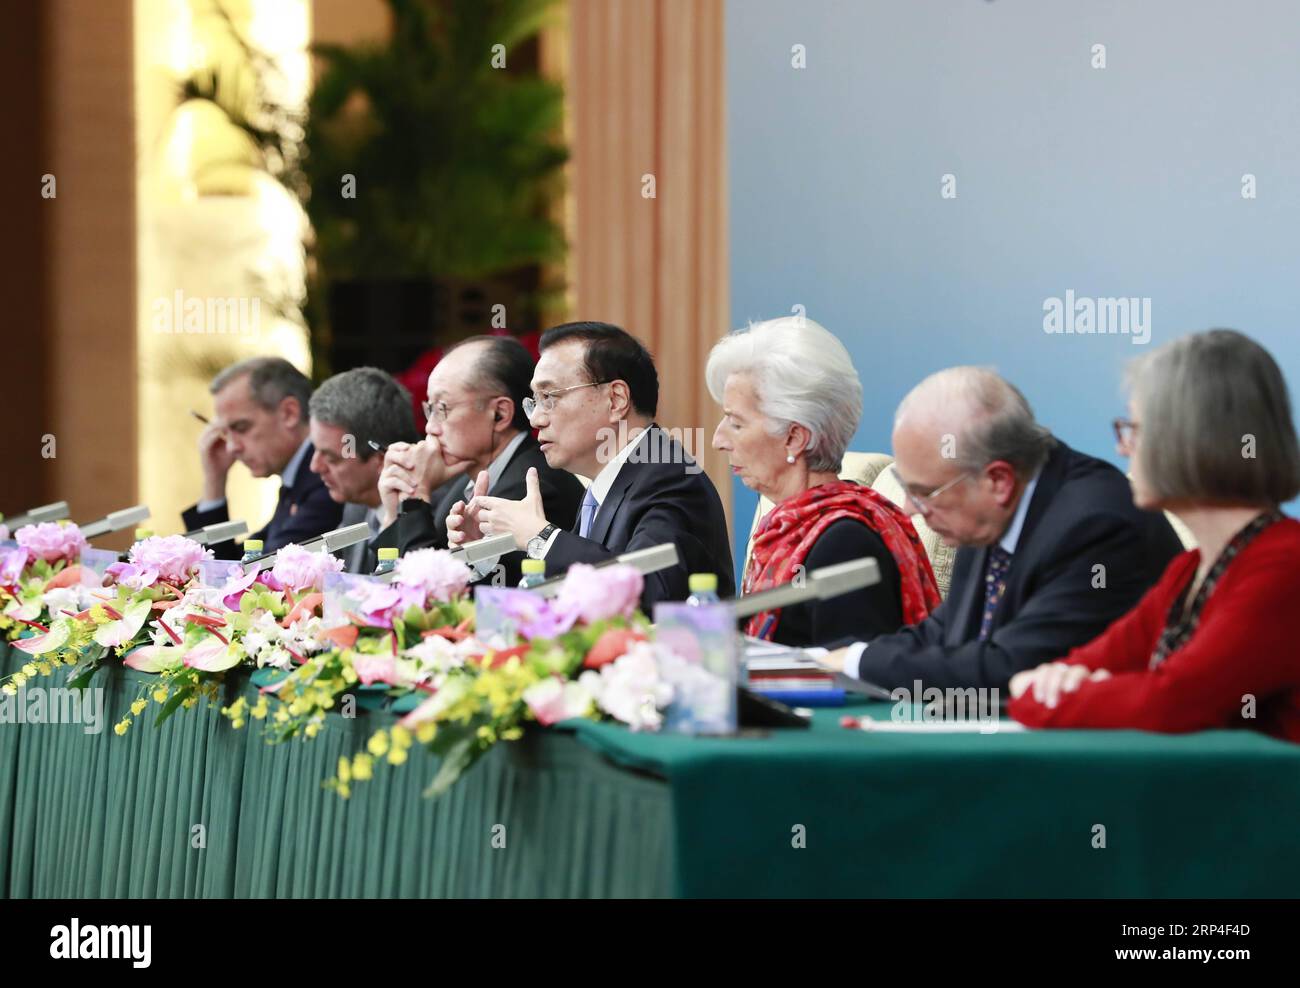 (181106) -- BEIJING, Nov. 6, 2018 -- Chinese Premier Li Keqiang (C), together with World Bank Group (WBG) President Jim Yong Kim, International Monetary Fund (IMF) Managing Director Christine Lagarde, World Trade Organization (WTO) Director-General Roberto Azevedo, Organization for Economic Cooperation and Development (OECD) Secretary-General Angel Gurria, Financial Stability Board (FSB) Chairman Mark Carney and International Labor Organization (ILO) Deputy Director-General Deborah Greenfield, meets the press after the third 1+6 Roundtable held in Beijing, capital of China, on Nov. 6, 2018. ) Stock Photo